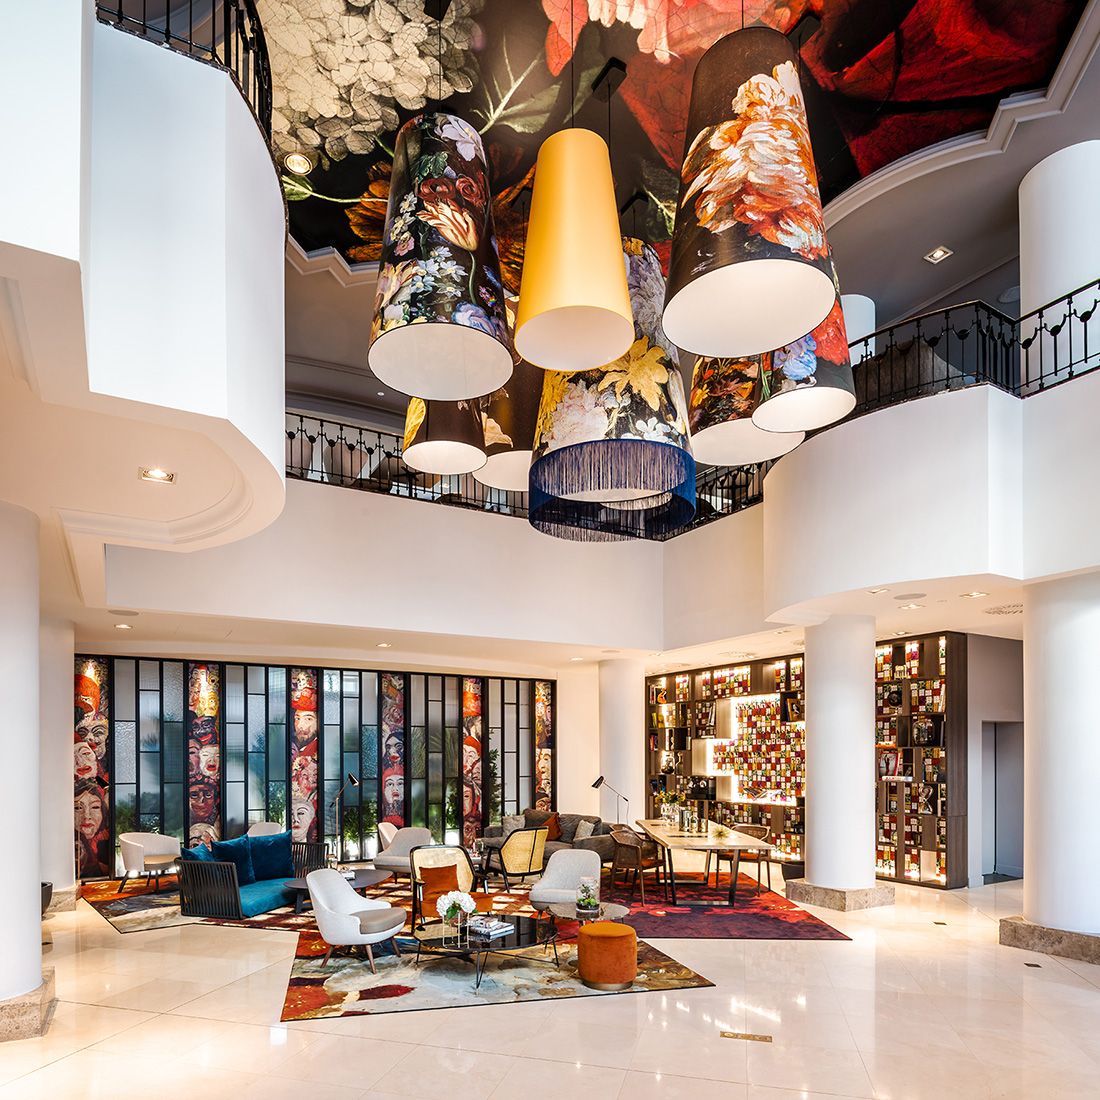 Lobby of the 4 star hotel renaissance brussels designed by the interior design studio jean-phiippe nuel, lifestyle hotel in belgium, colorful decoration